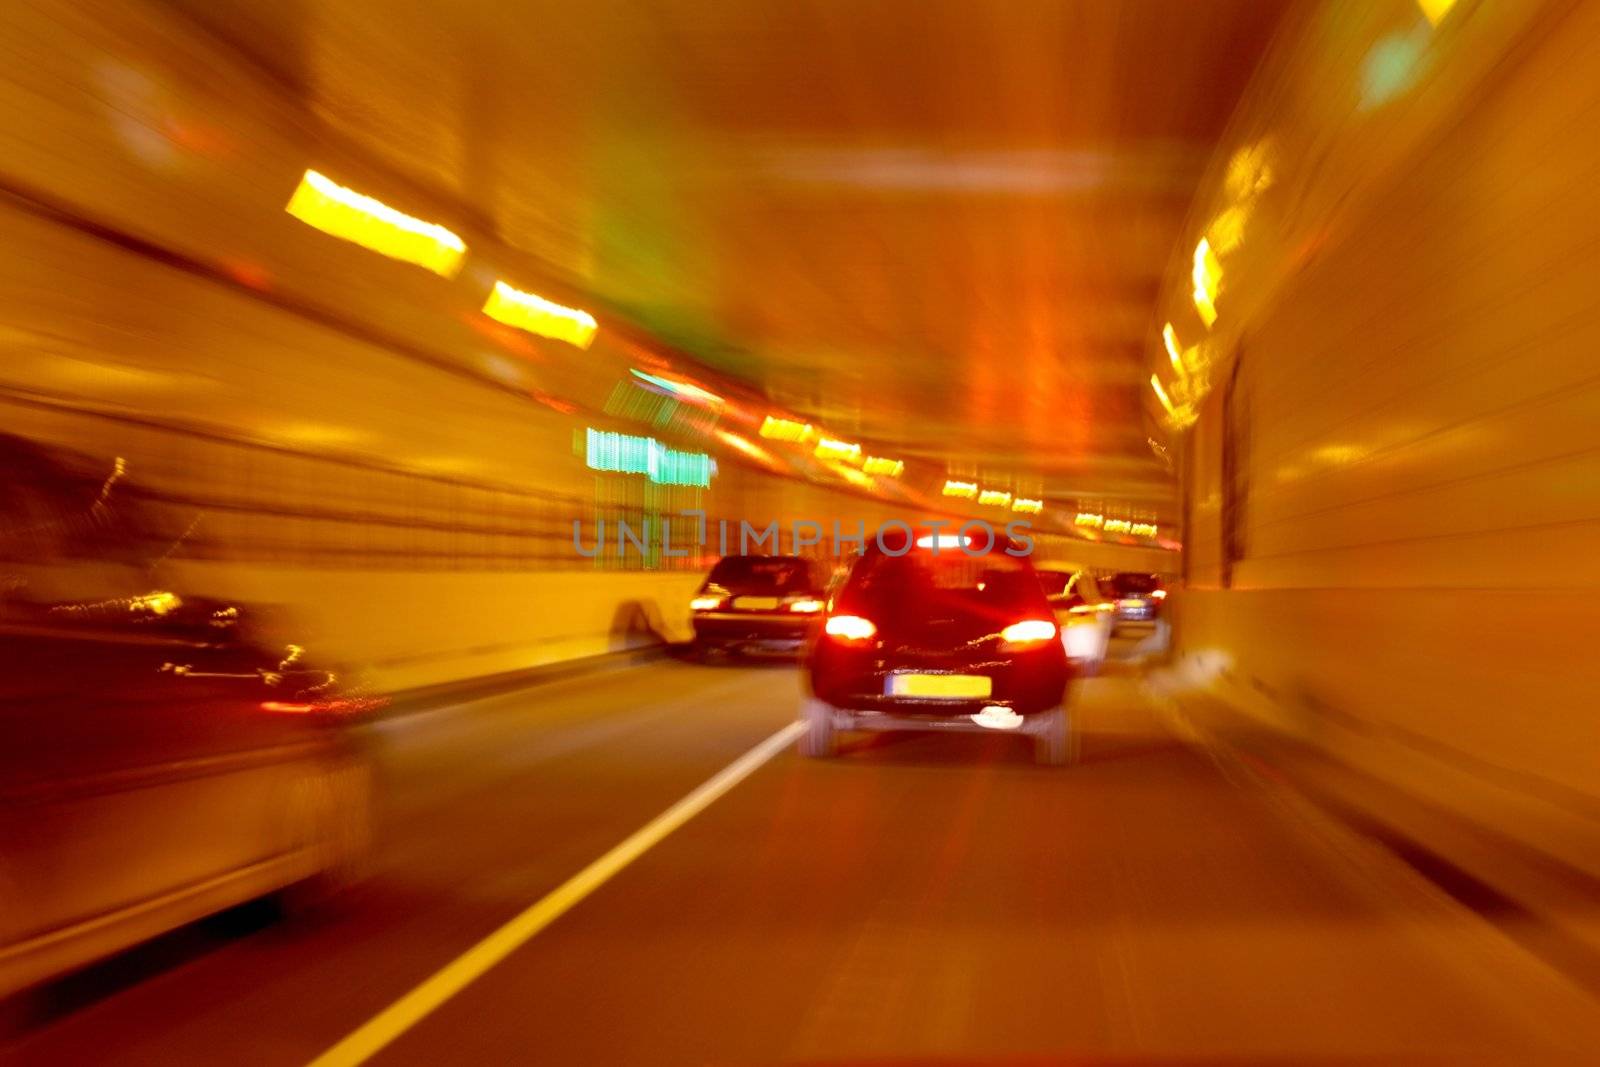  Driving through the Maastunnel near Rotterdam in the Netherlands by devy